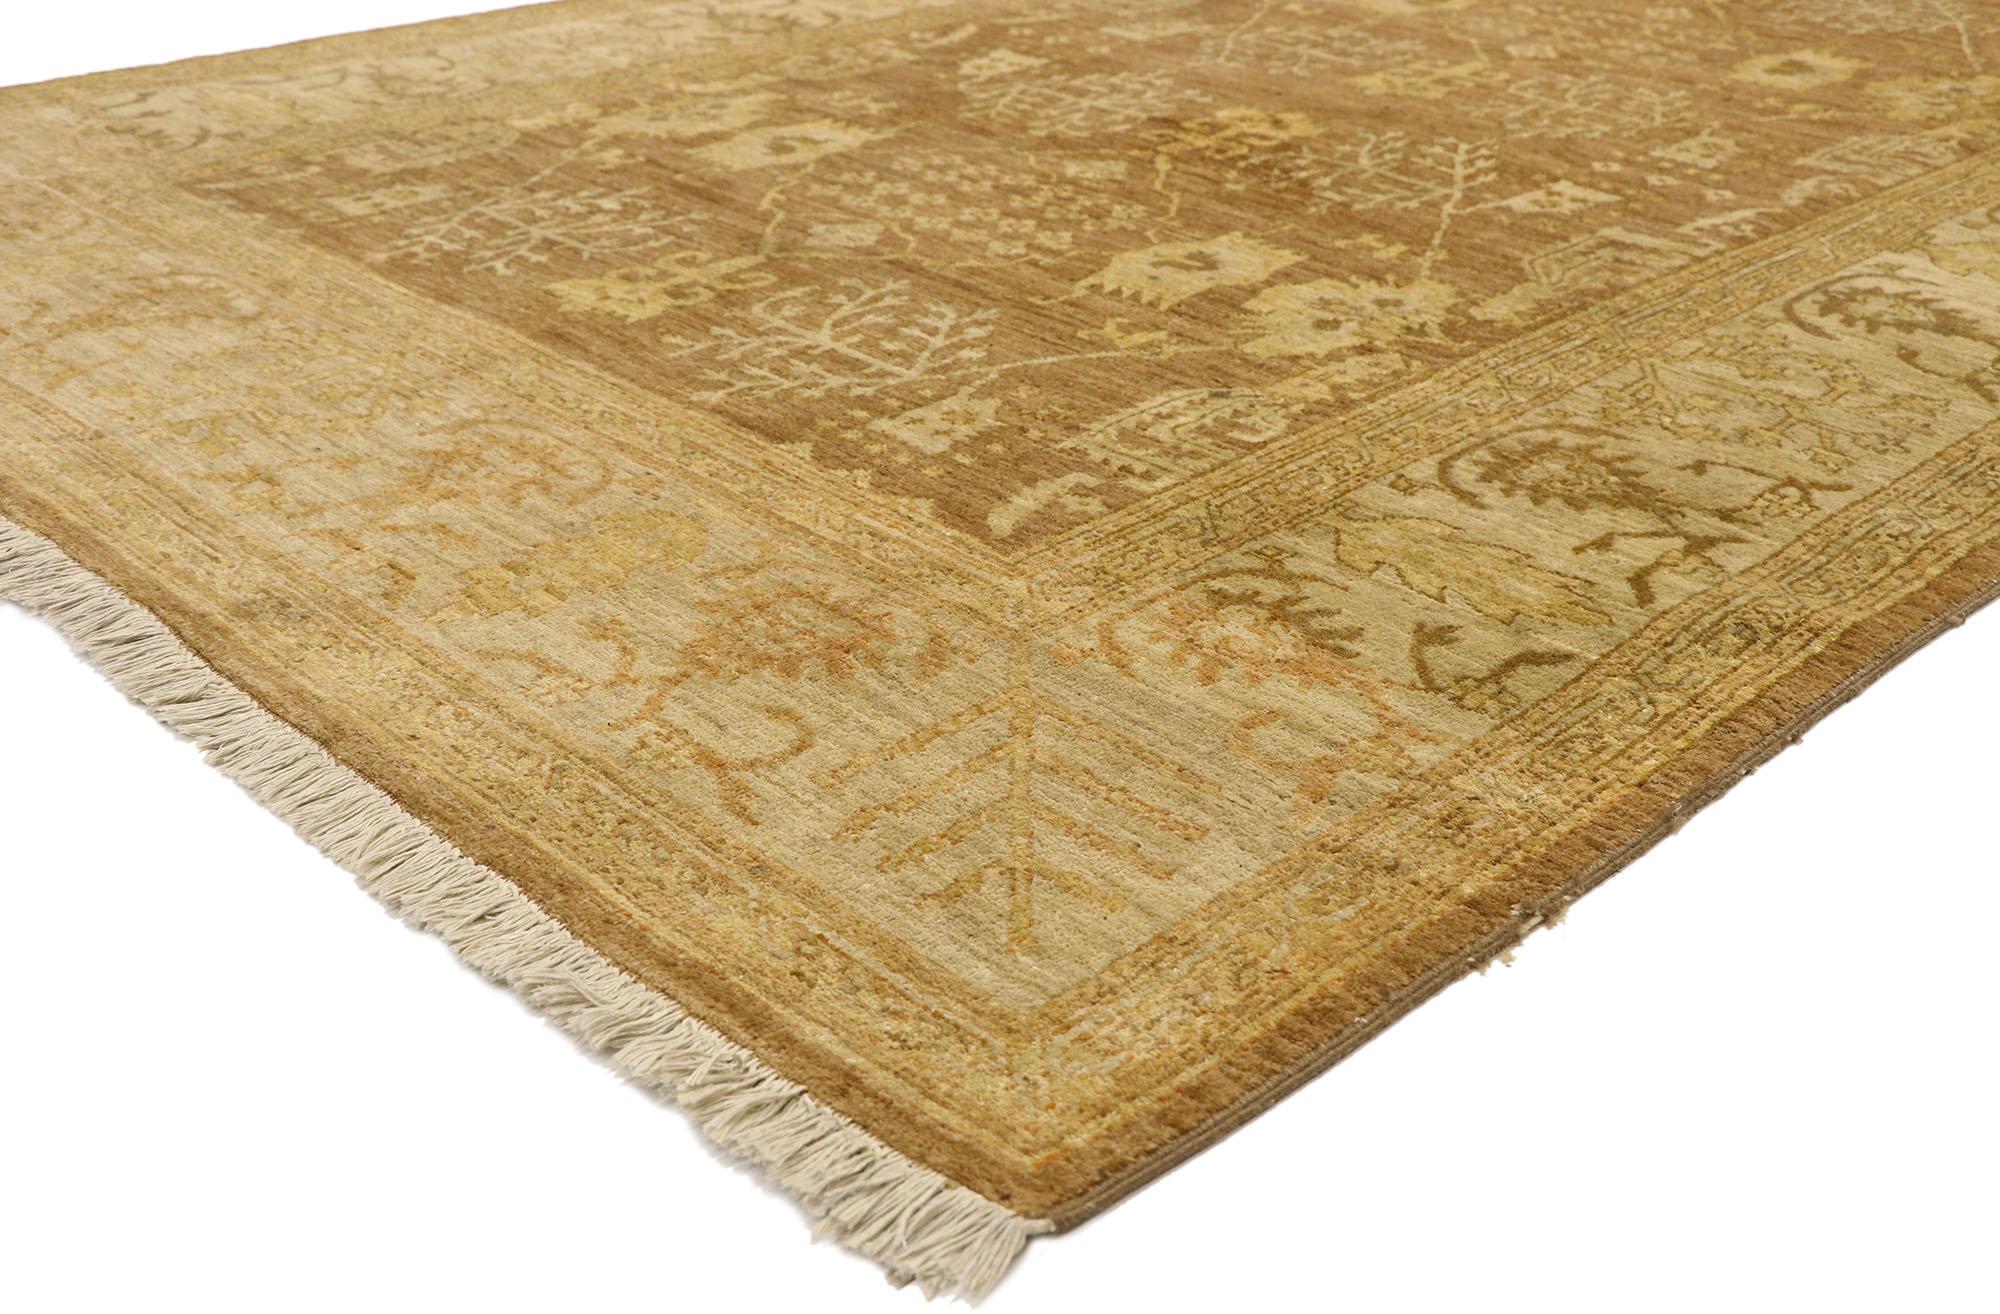 77422 vintage traditional Indian rug with Warm, Russian Dachas Home style. Warm and inviting combined with the rectilinear design elements, this hand knotted wool traditional Indian rug charms with ease and stays true to fine craftsmanship and the